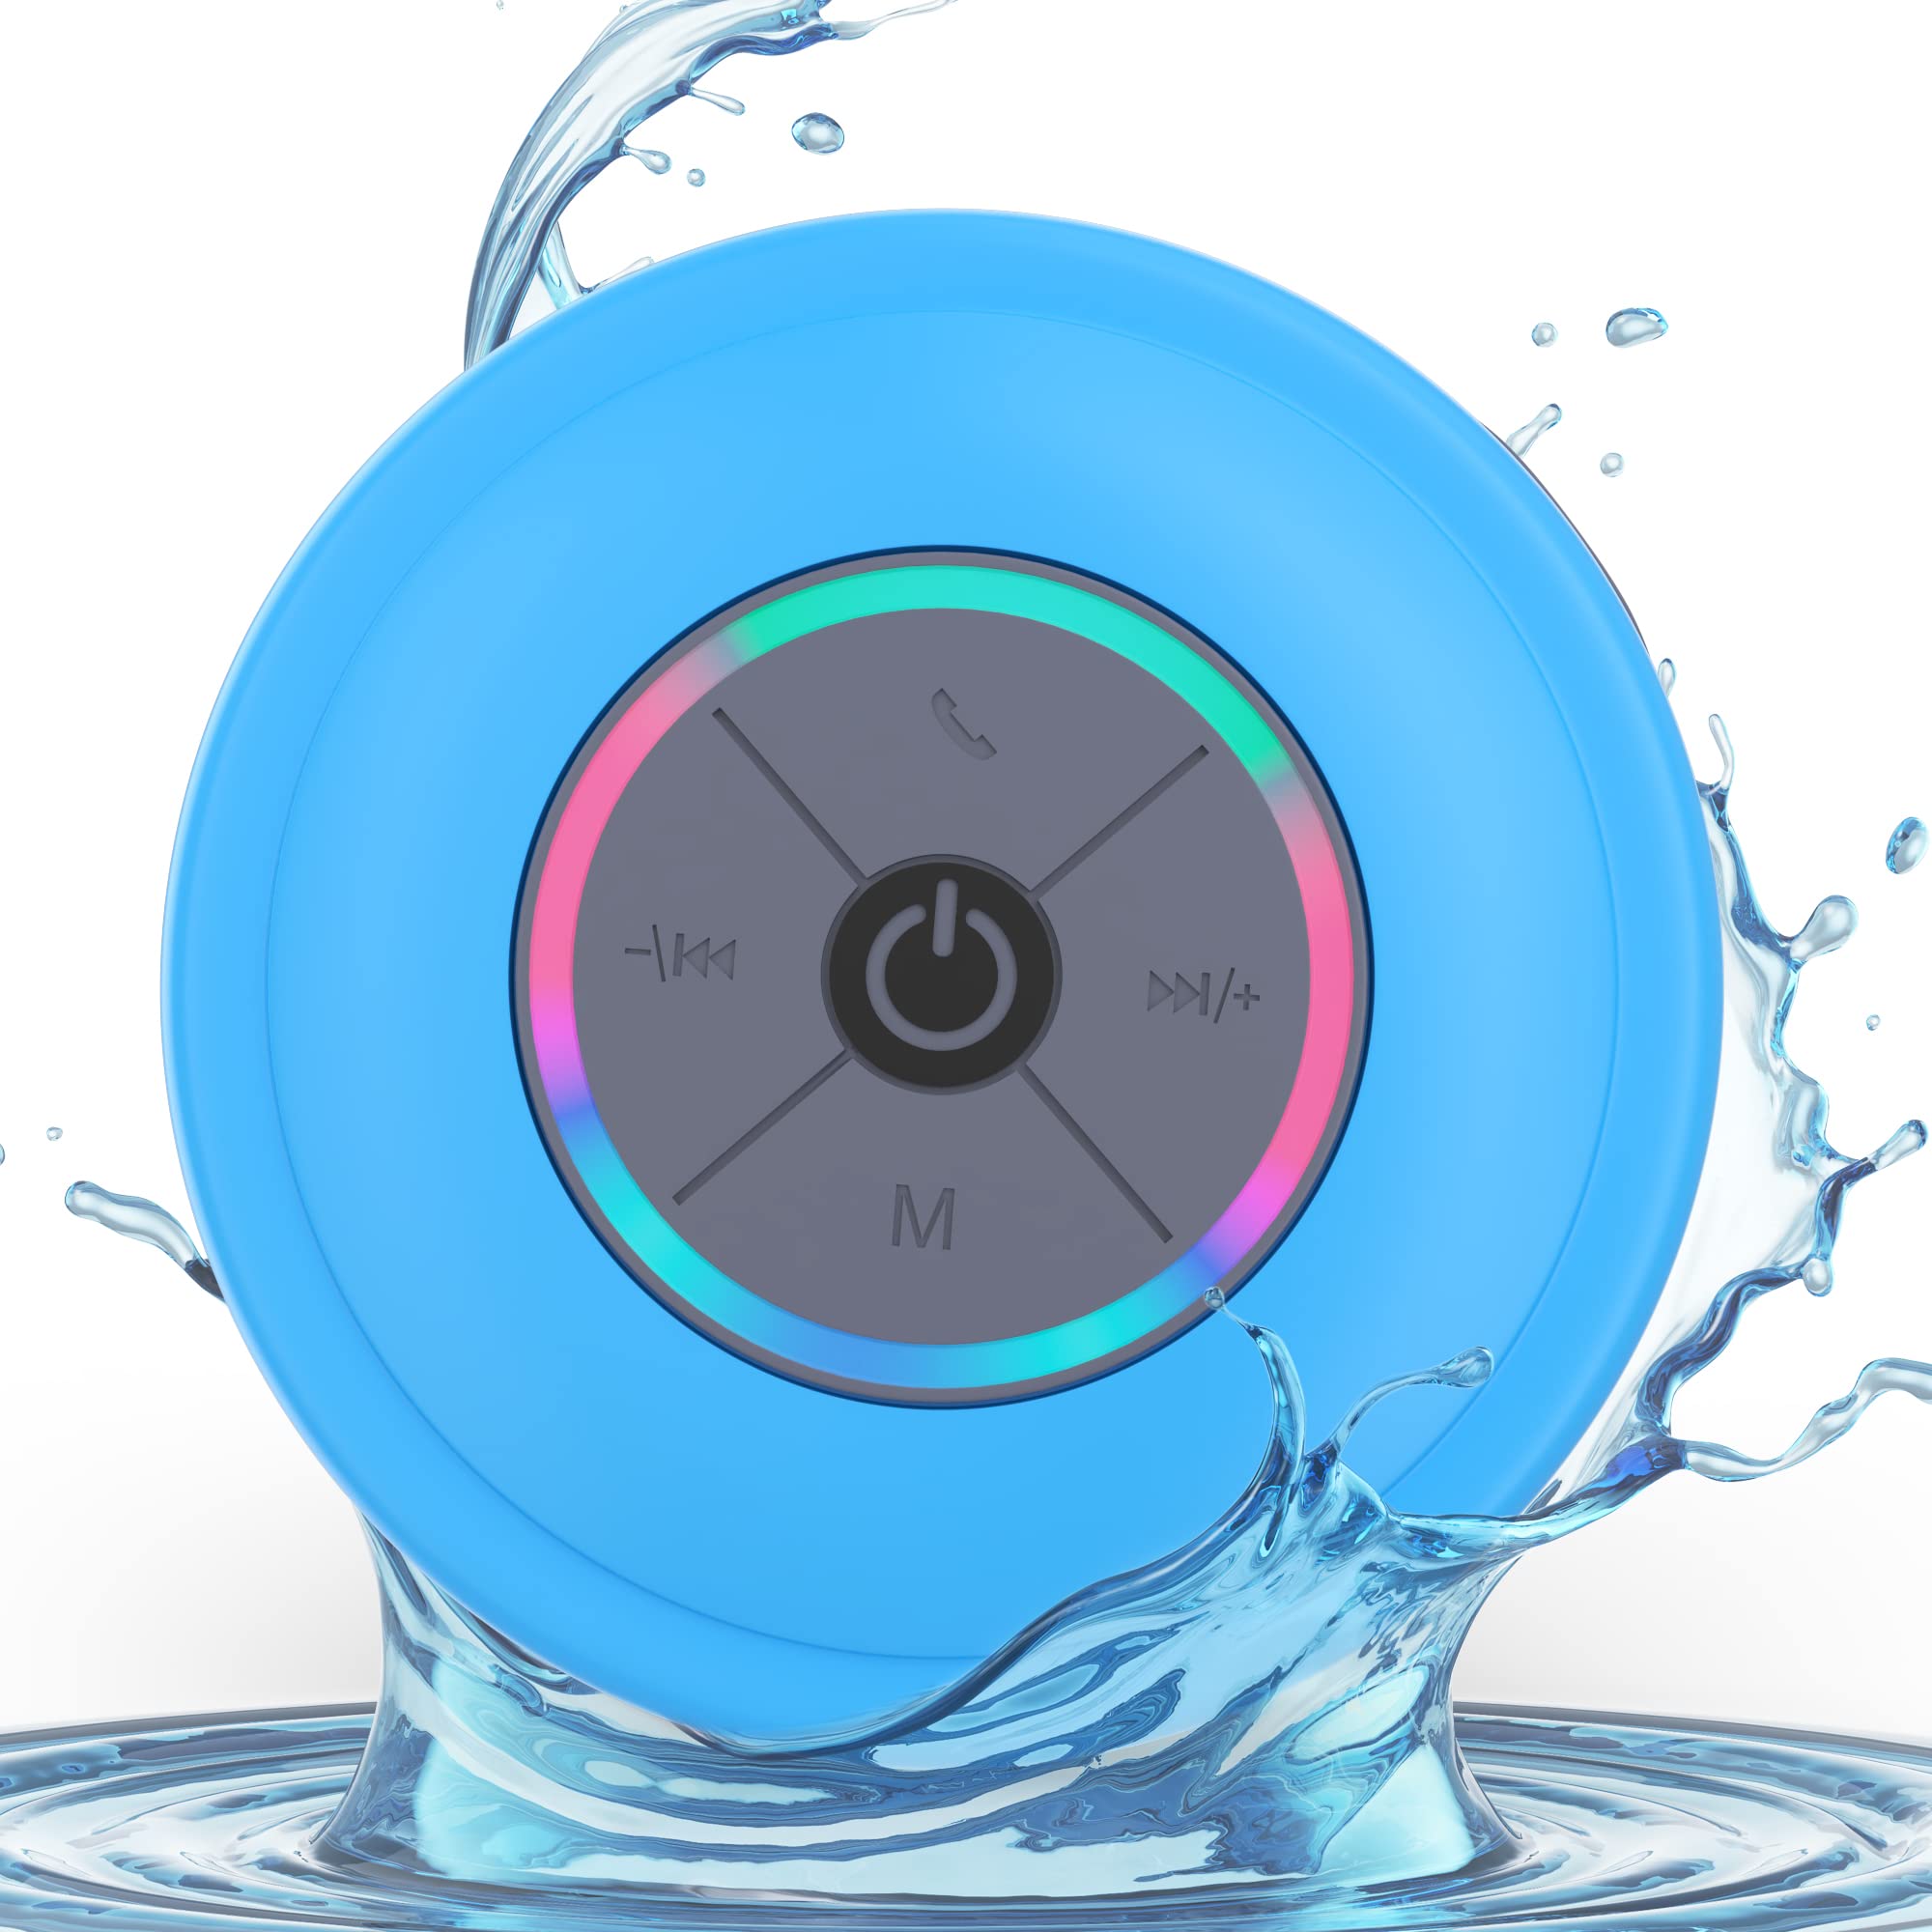 Speakers Bluetooth Wireless – Colorful Shower Speaker – Advanced Waterproof Bluetooth Speaker with Suction Cup Installation - Wireless Speakers with Bluetooth and Rechargeable Battery bathroom speaker